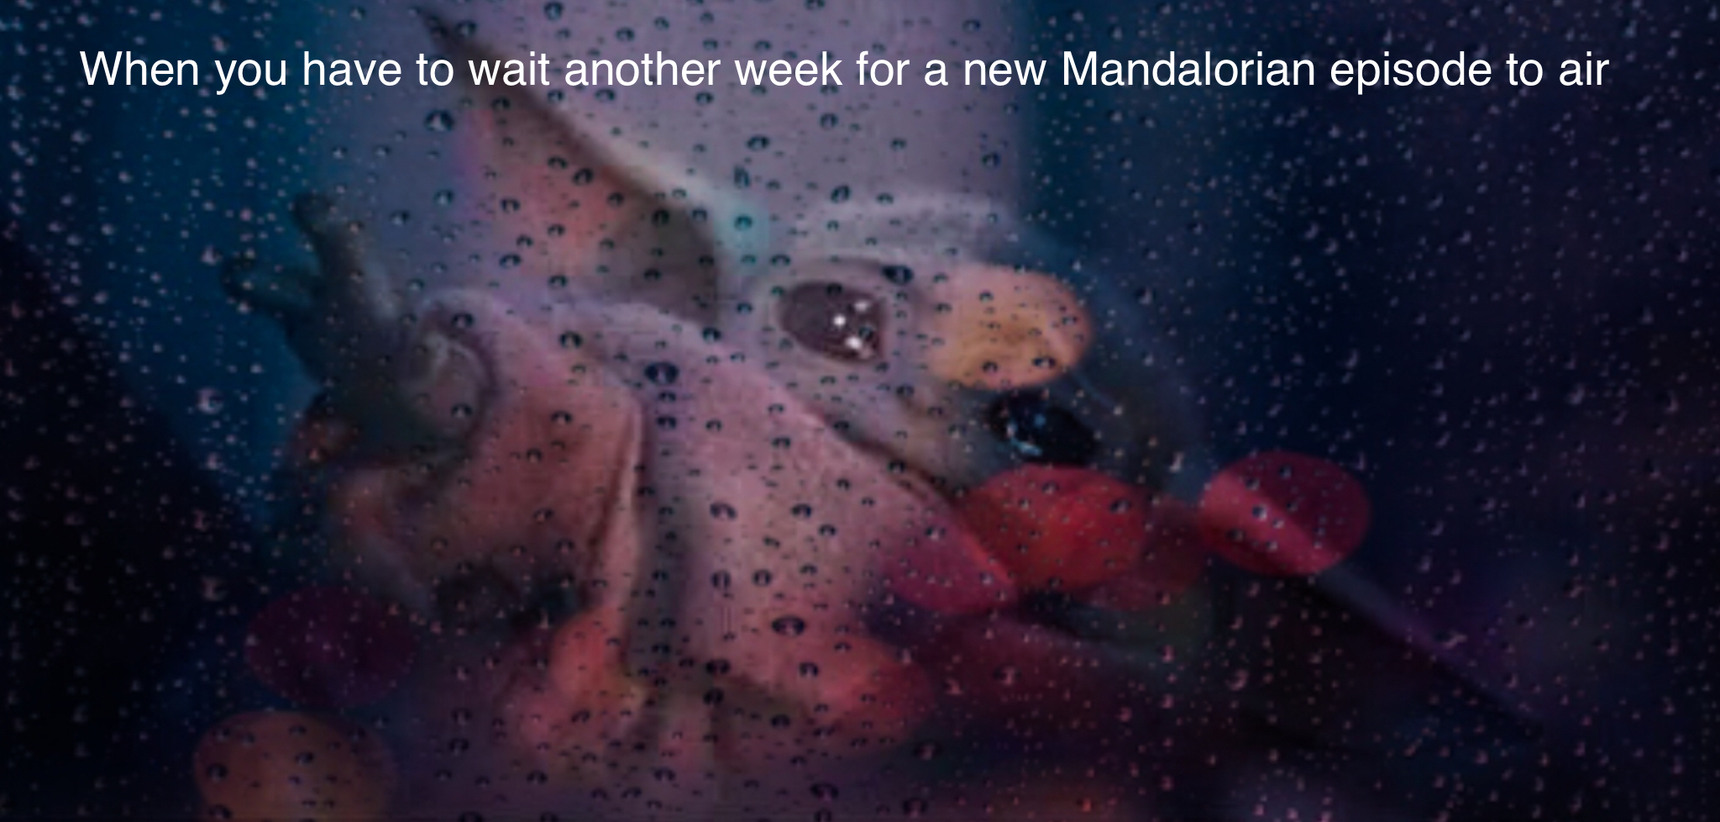 When you have to wait for the next Mandalorian episode to air - meme